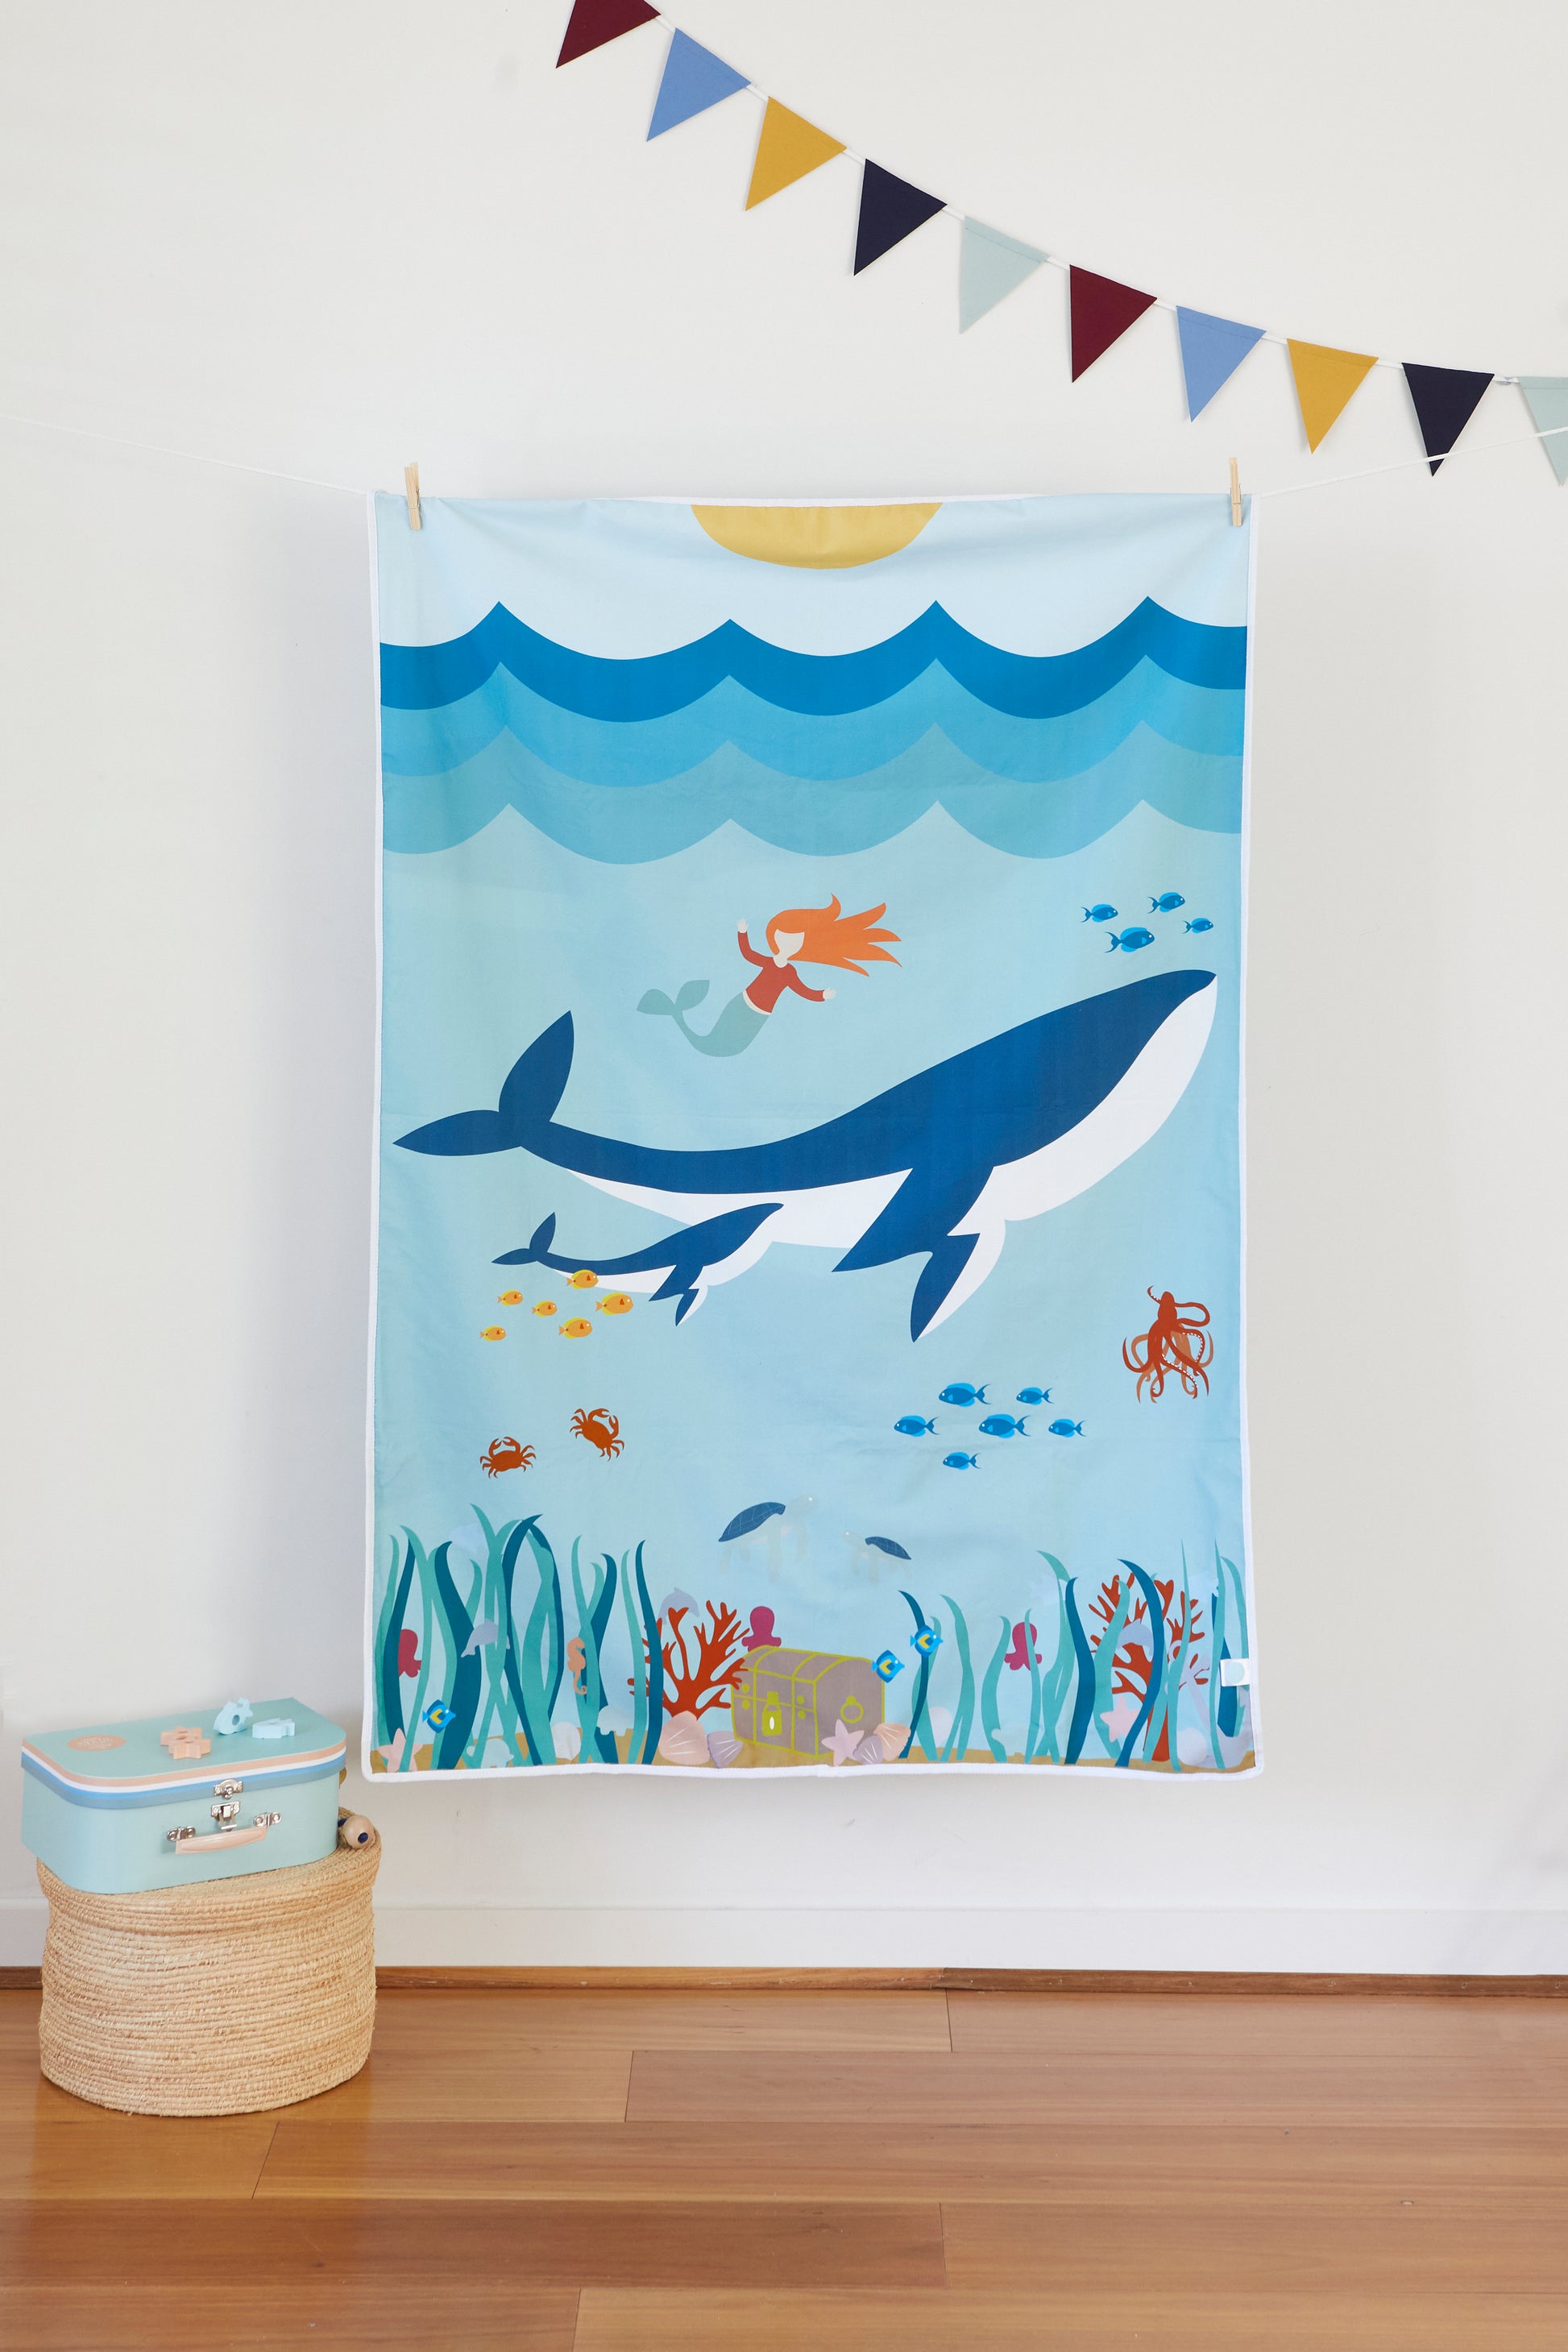 Ocean Lover Playmat, Material: 100% cotton. Playmat size 1m x 1.4m includes carry strap. Double sided printed (Mermaid& Diving theme) Portable, lightweight, durable and washable. Perfect portable solution for busy caregivers. Supports your child's imagination. Environmentally friendly packaging.